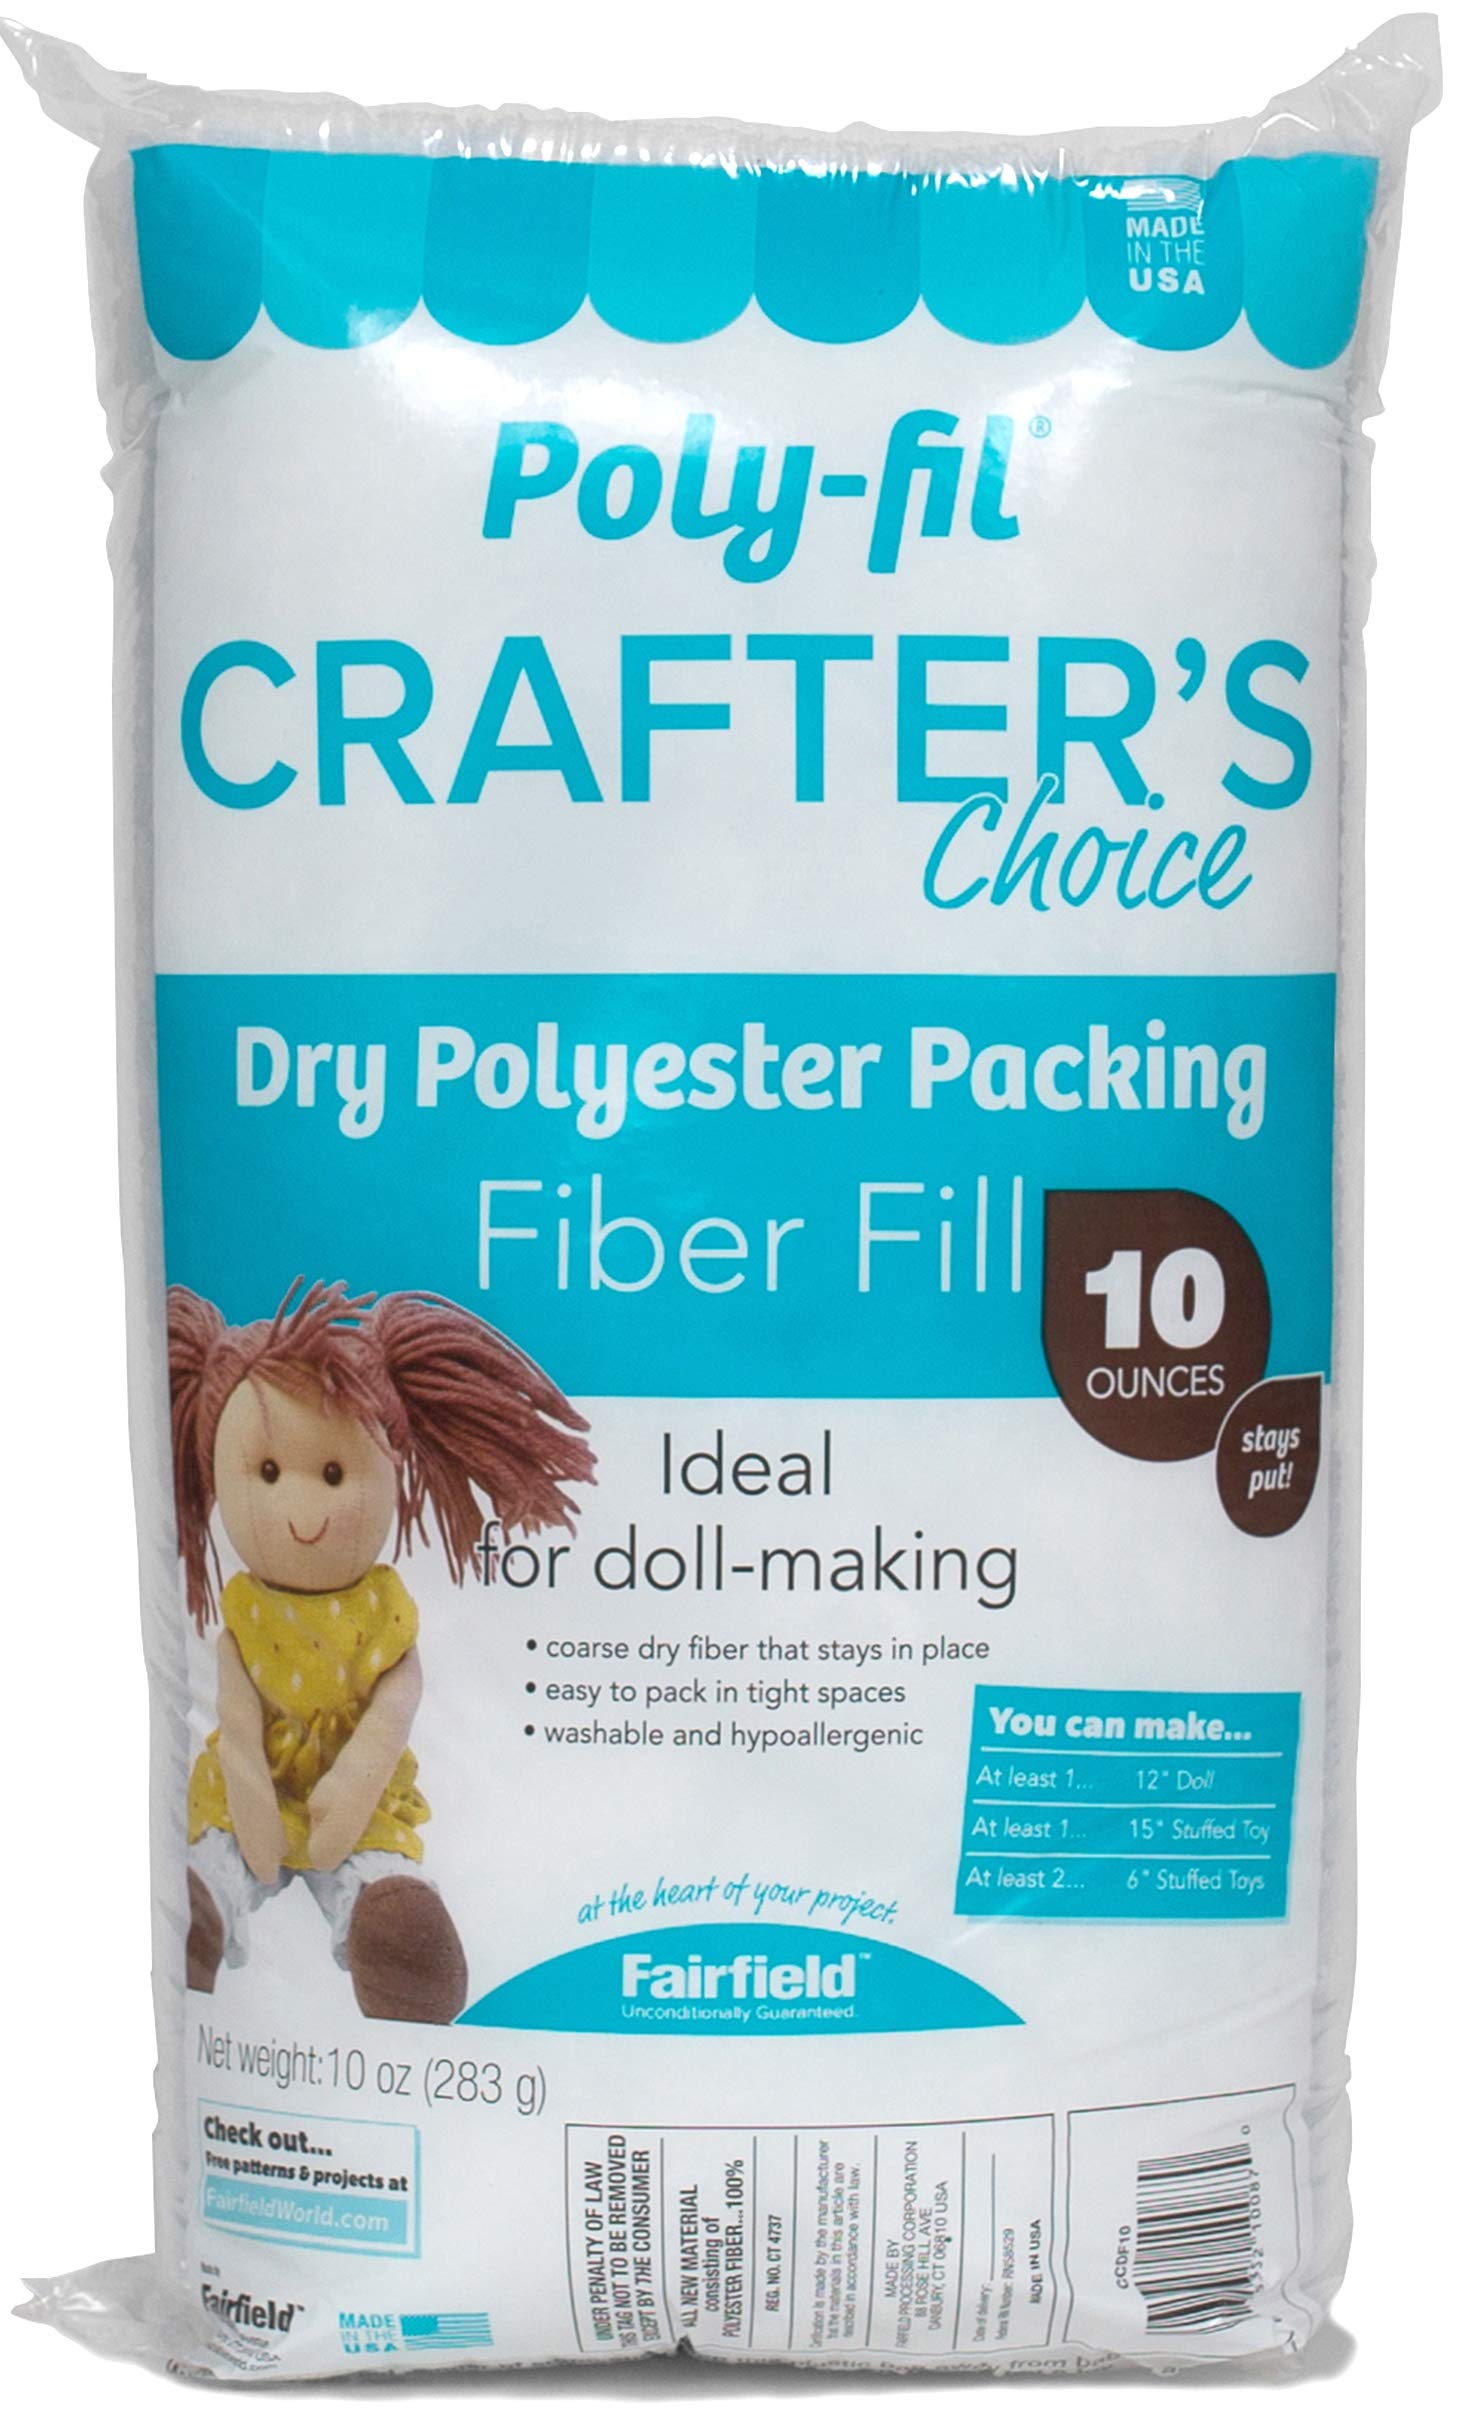 Fairfield CCDF10 Poly-Fil Crafter's Choice Dry Packing Fiber Fill 10 Ounce  Bag, Blue